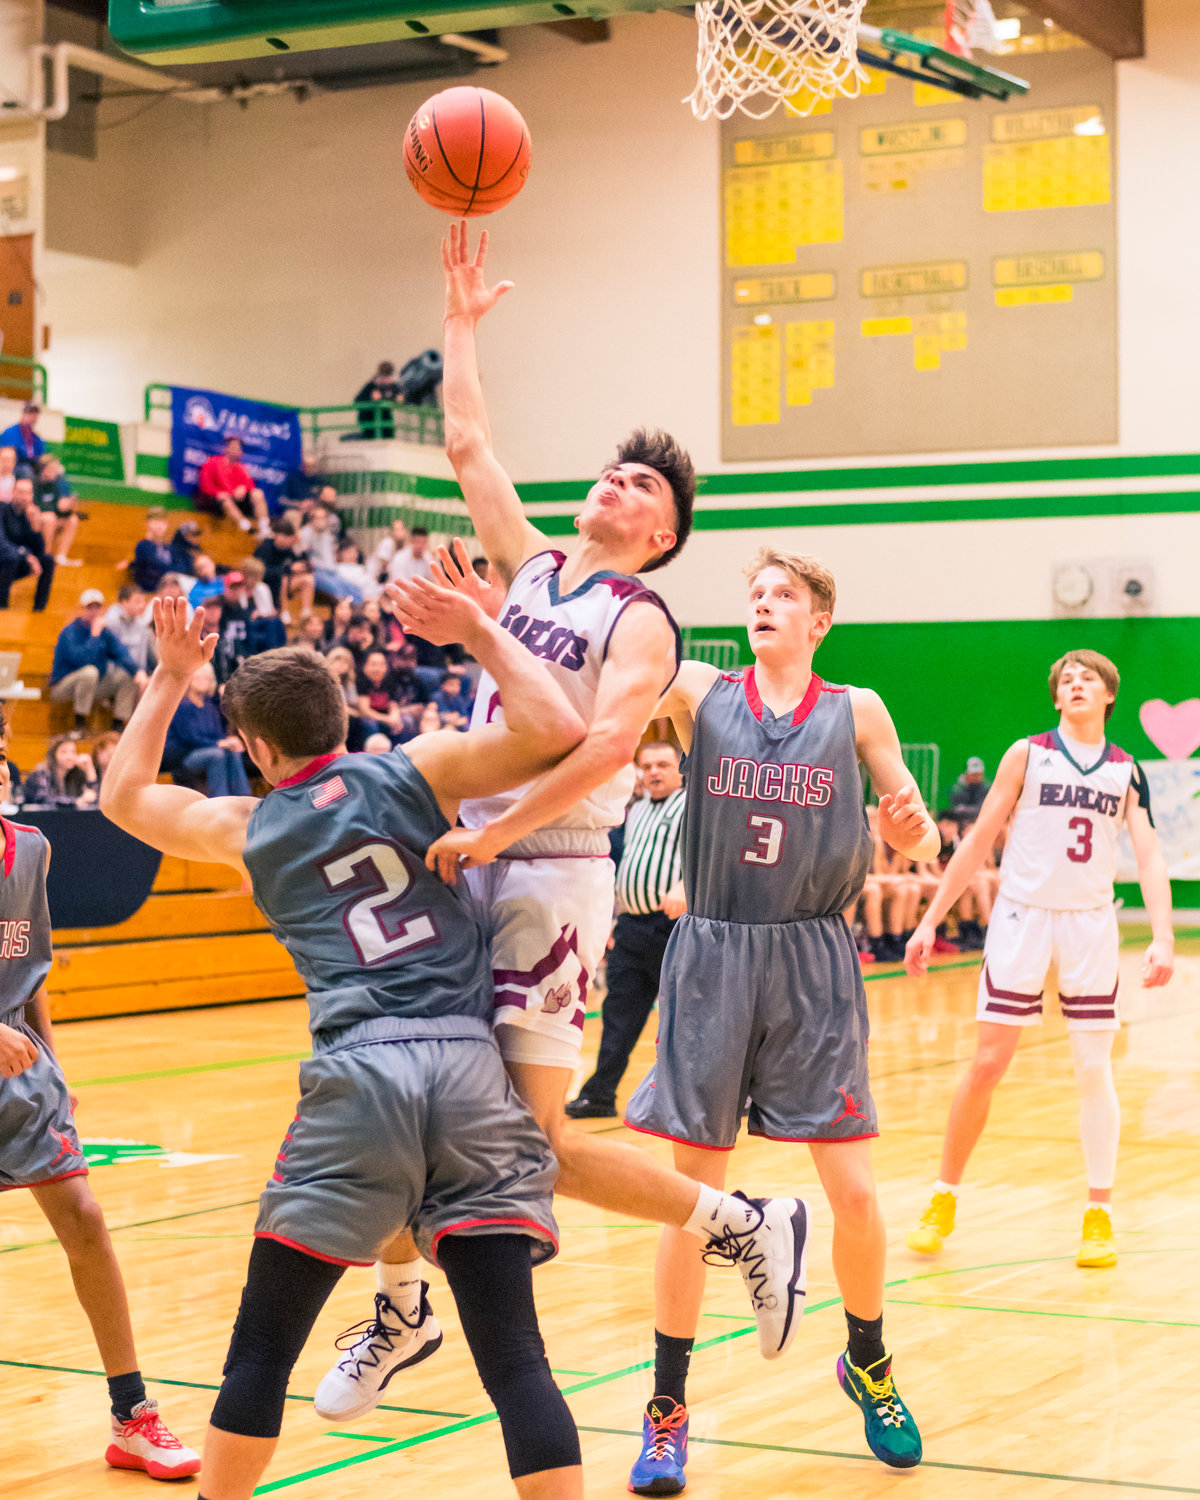 W.F. West's Kayden Kelly (2) puts up a shot during a game against Jacks Thursday night at Tumwater High School.